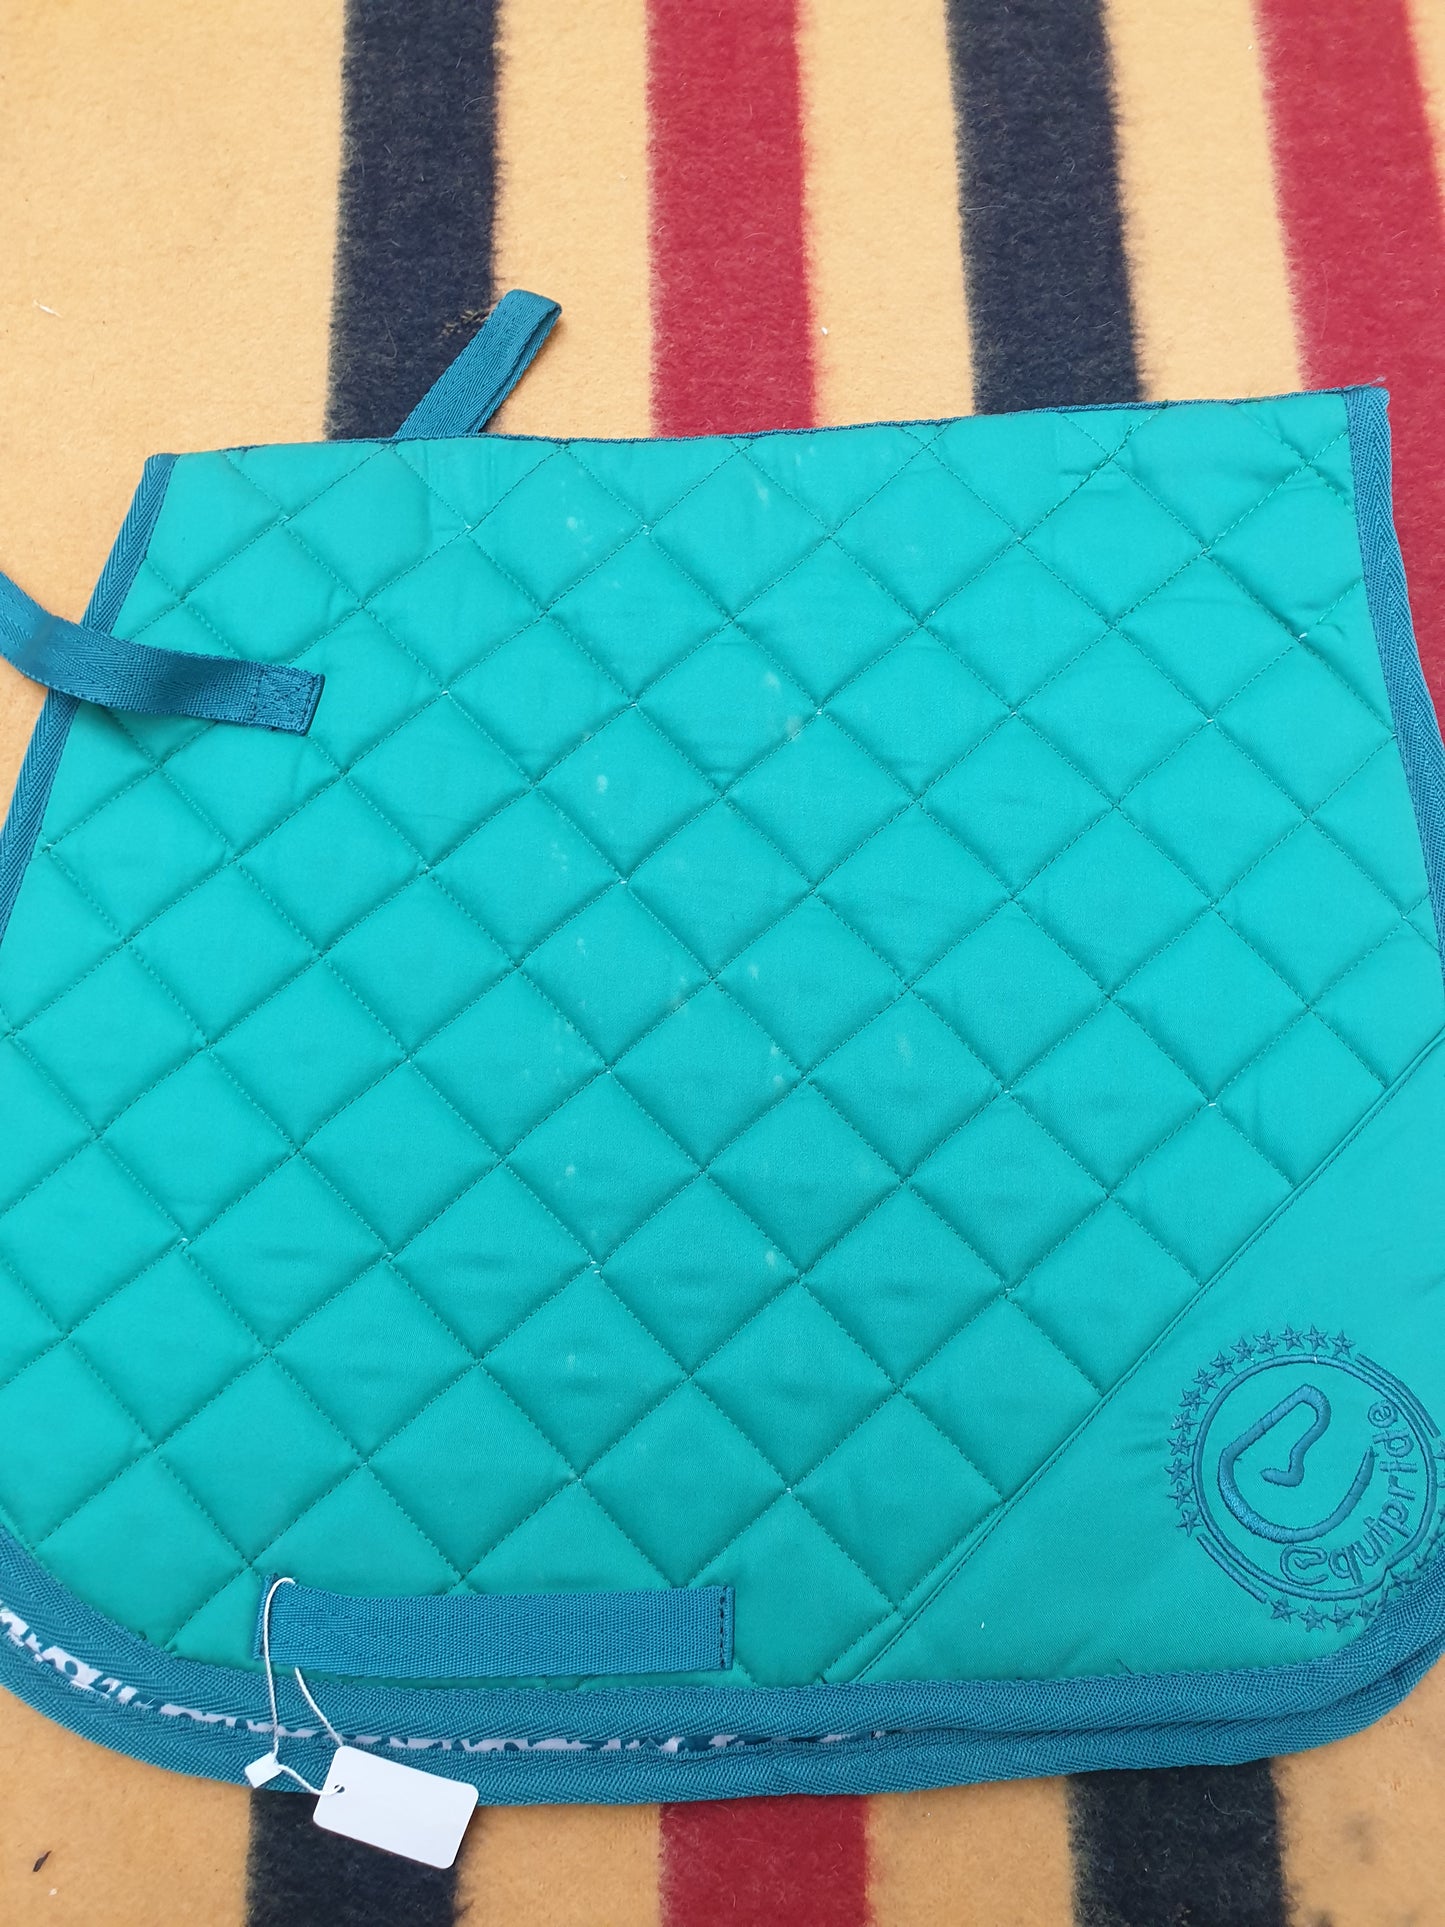 New equipride green pony size saddle pad FREE POSTAGE ✅